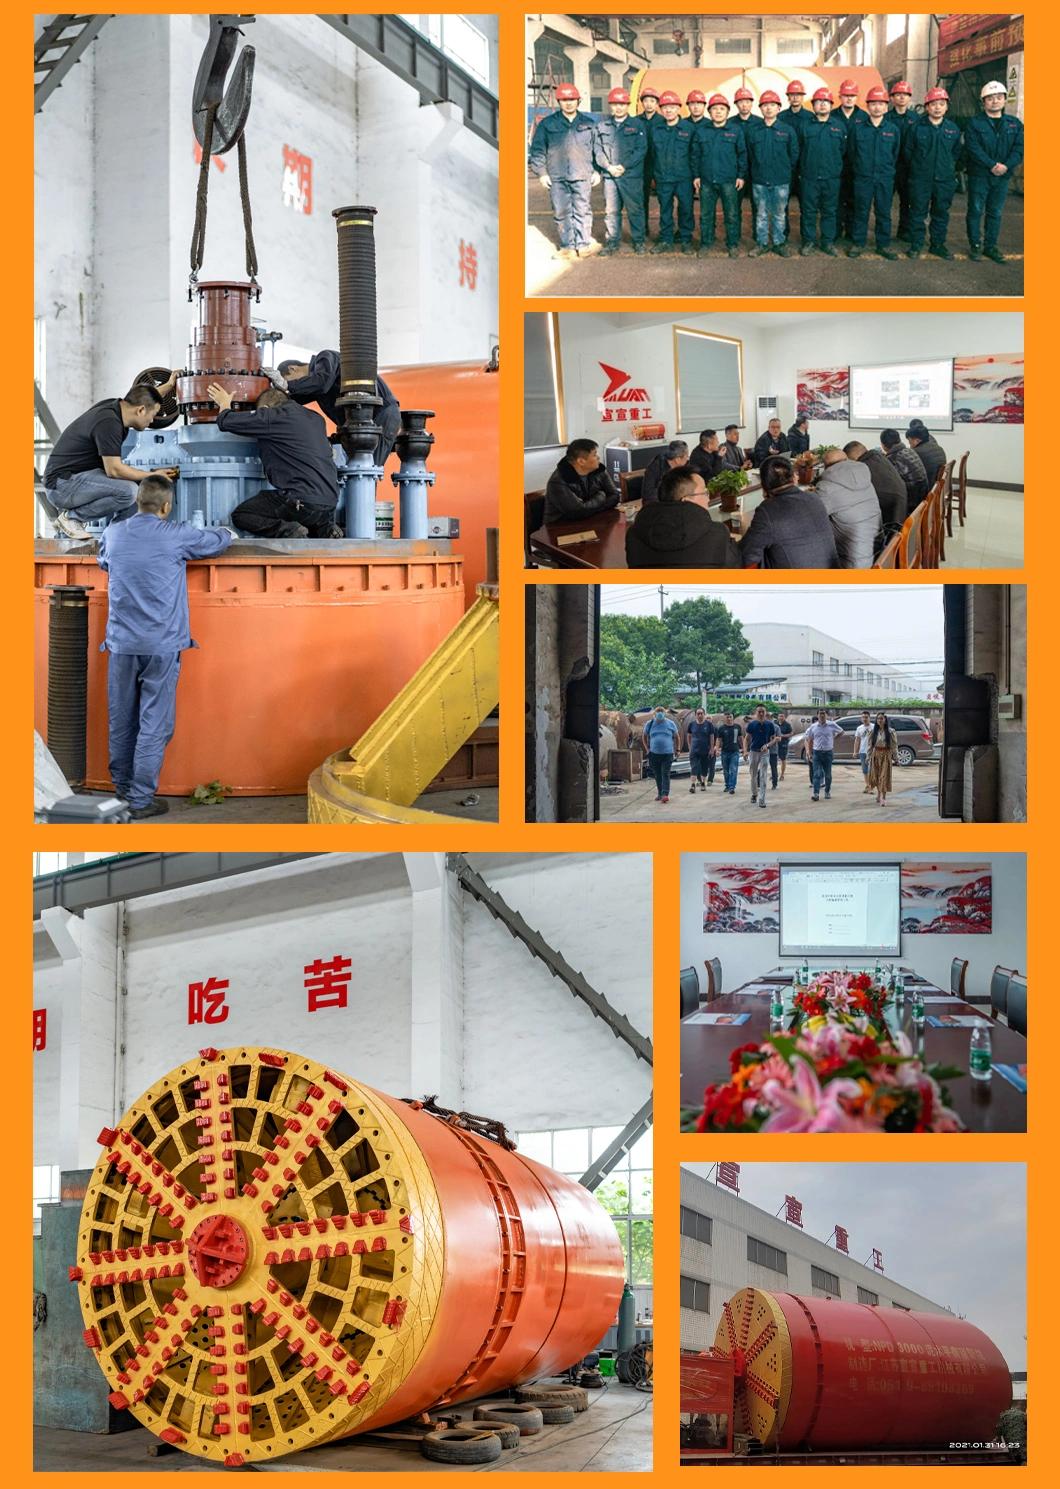 Compound Slurry Rock Pipe Jacking Machine/Tunnel Boring Machine for Soft Soil Rcc Ms Pipeline